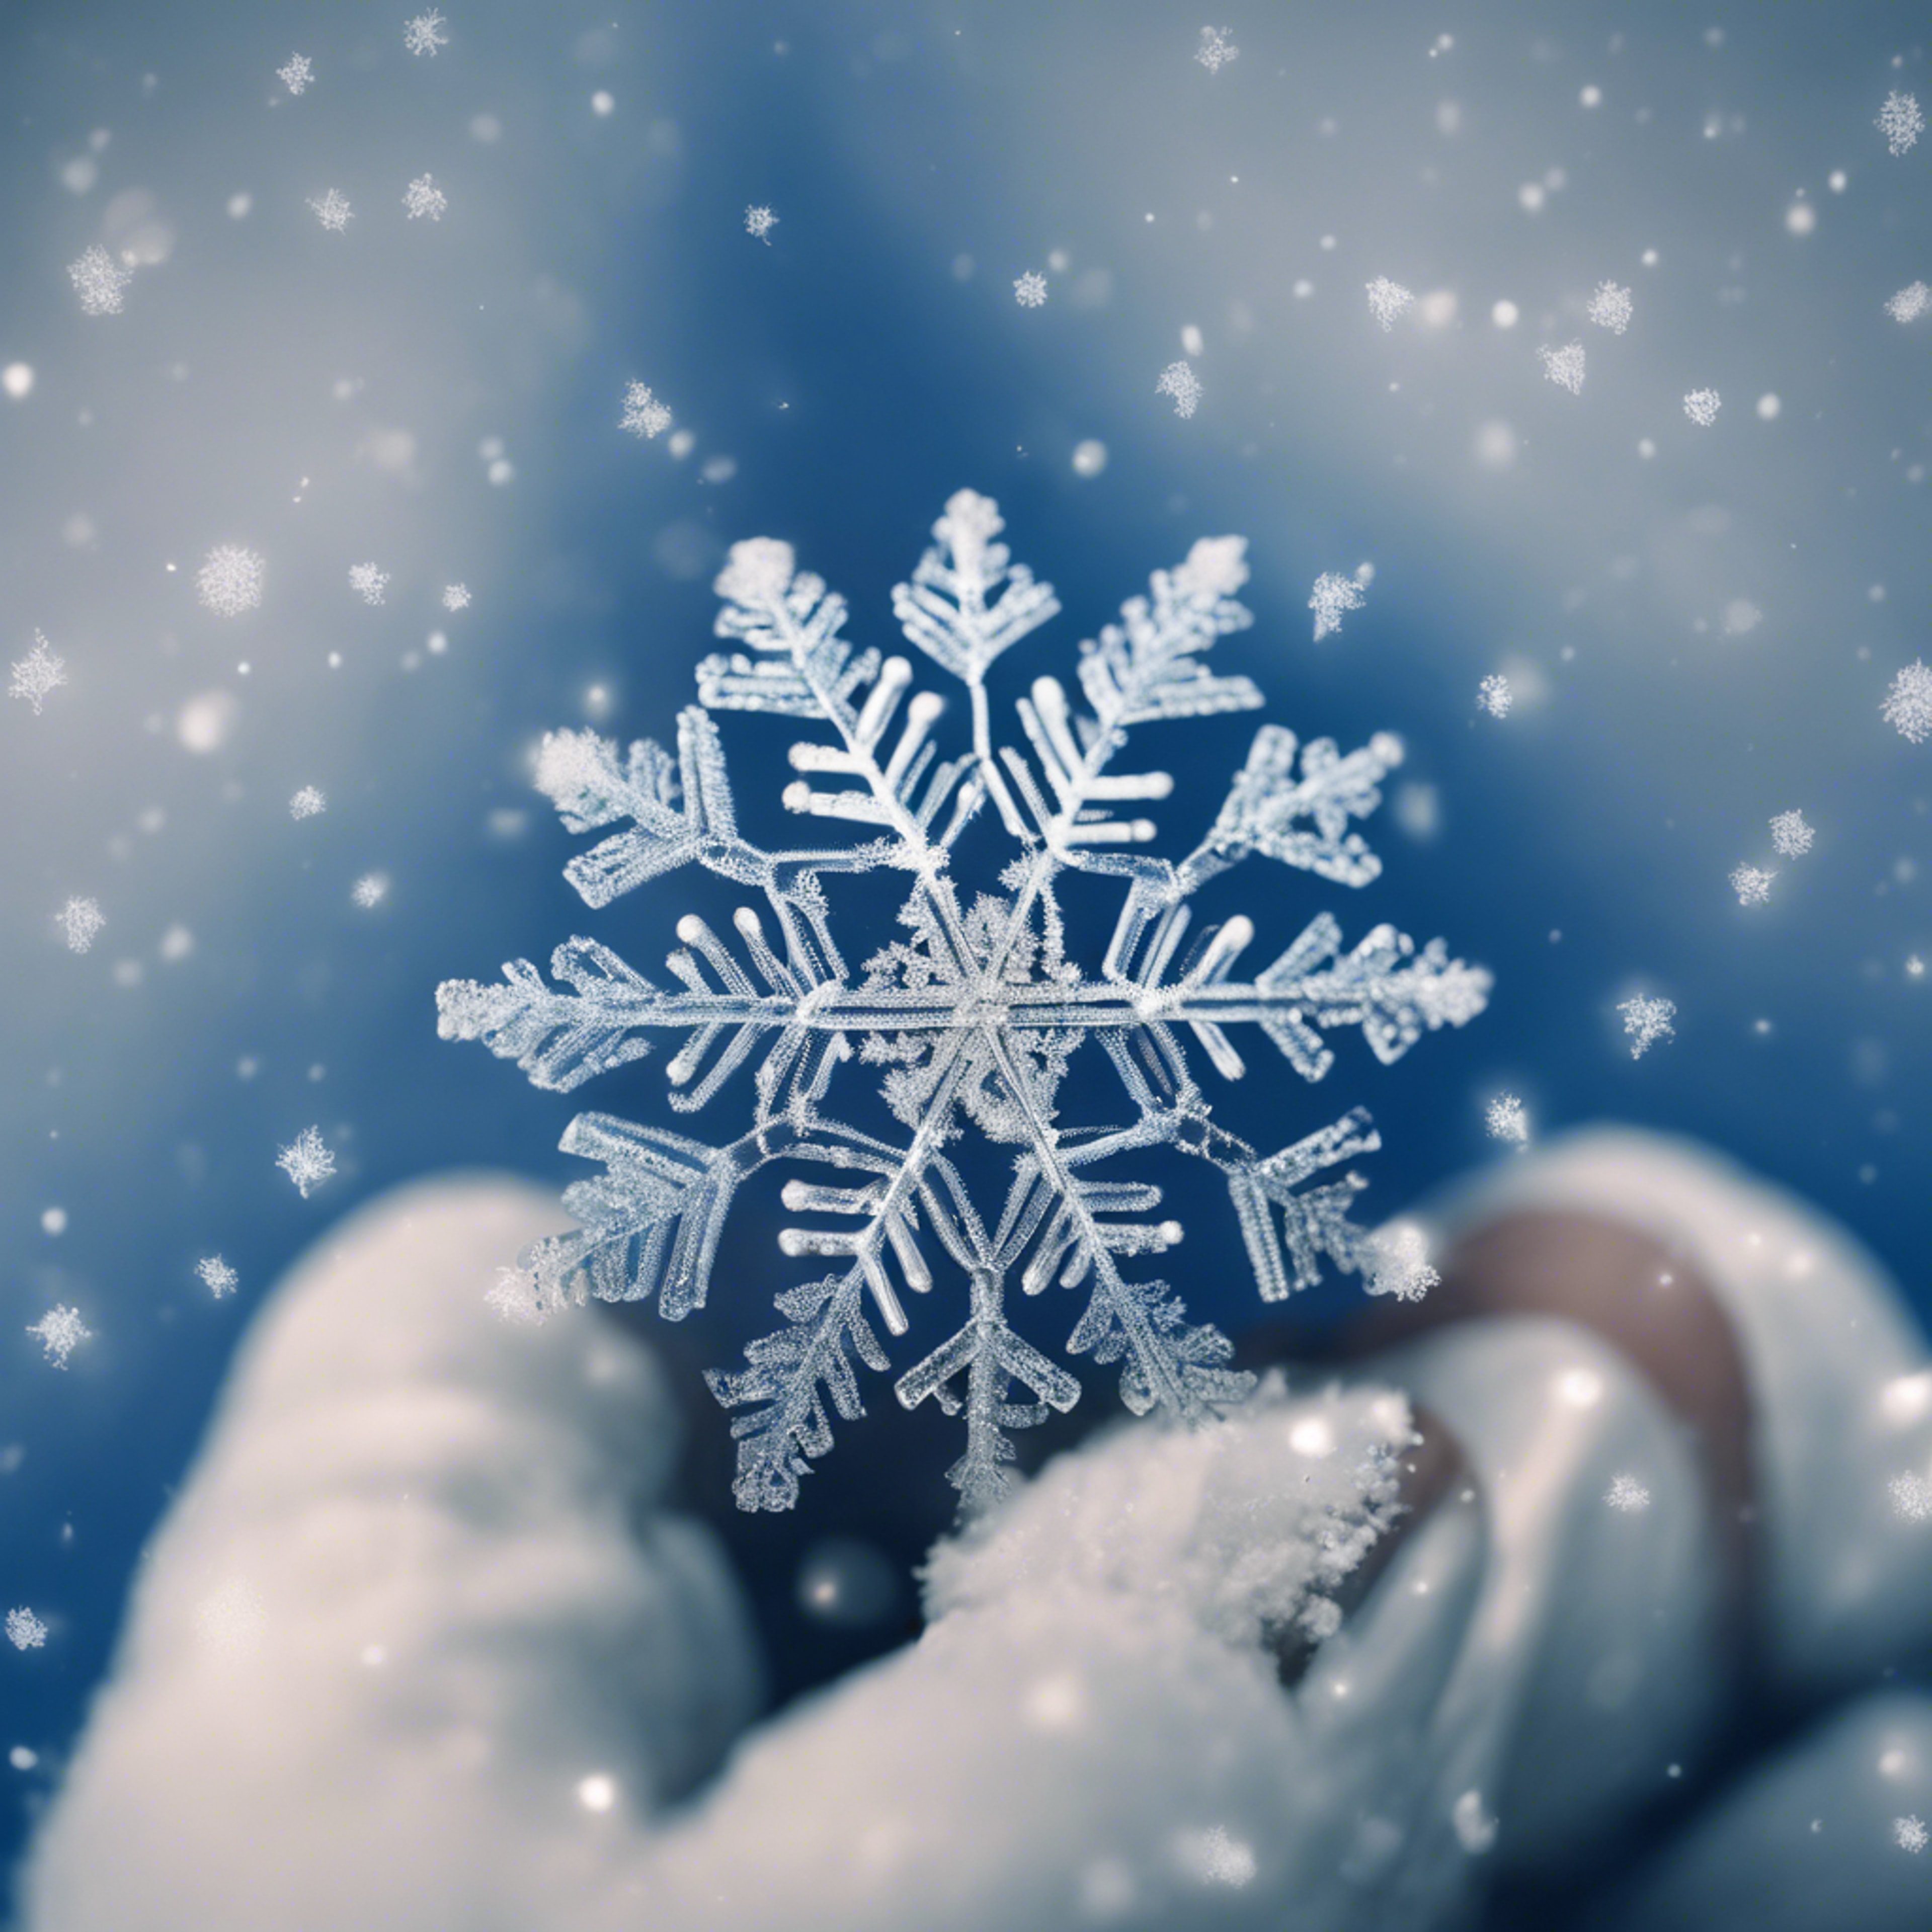 Intricate patterns of a snowflake on a blue gloved finger.壁紙[6c7ed0f3c74b413e9833]